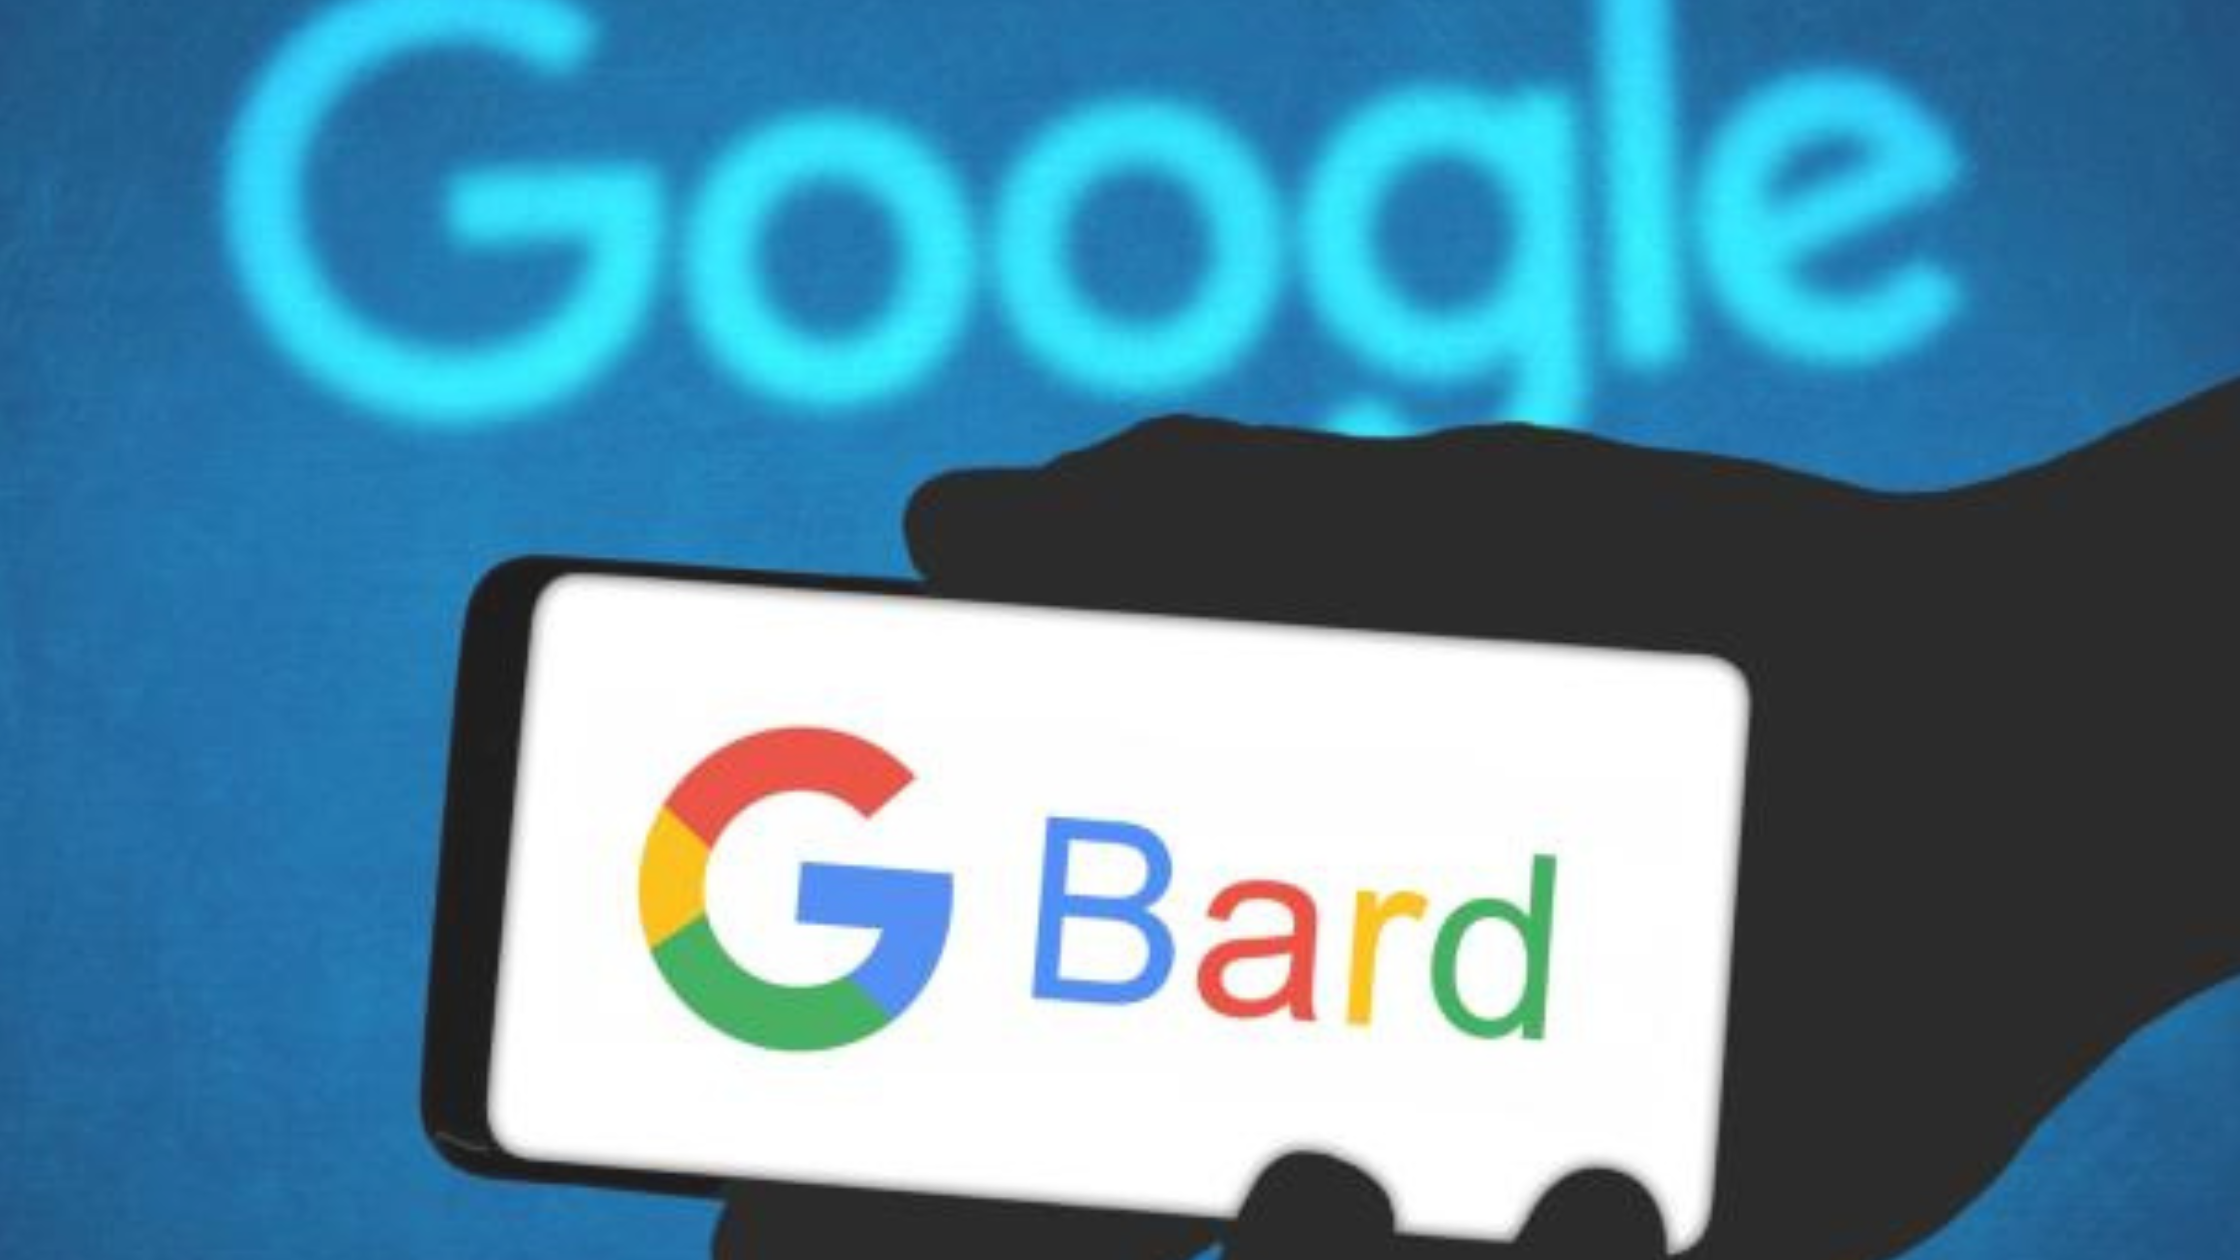 Google Bard: Changing the Game for Law Firms